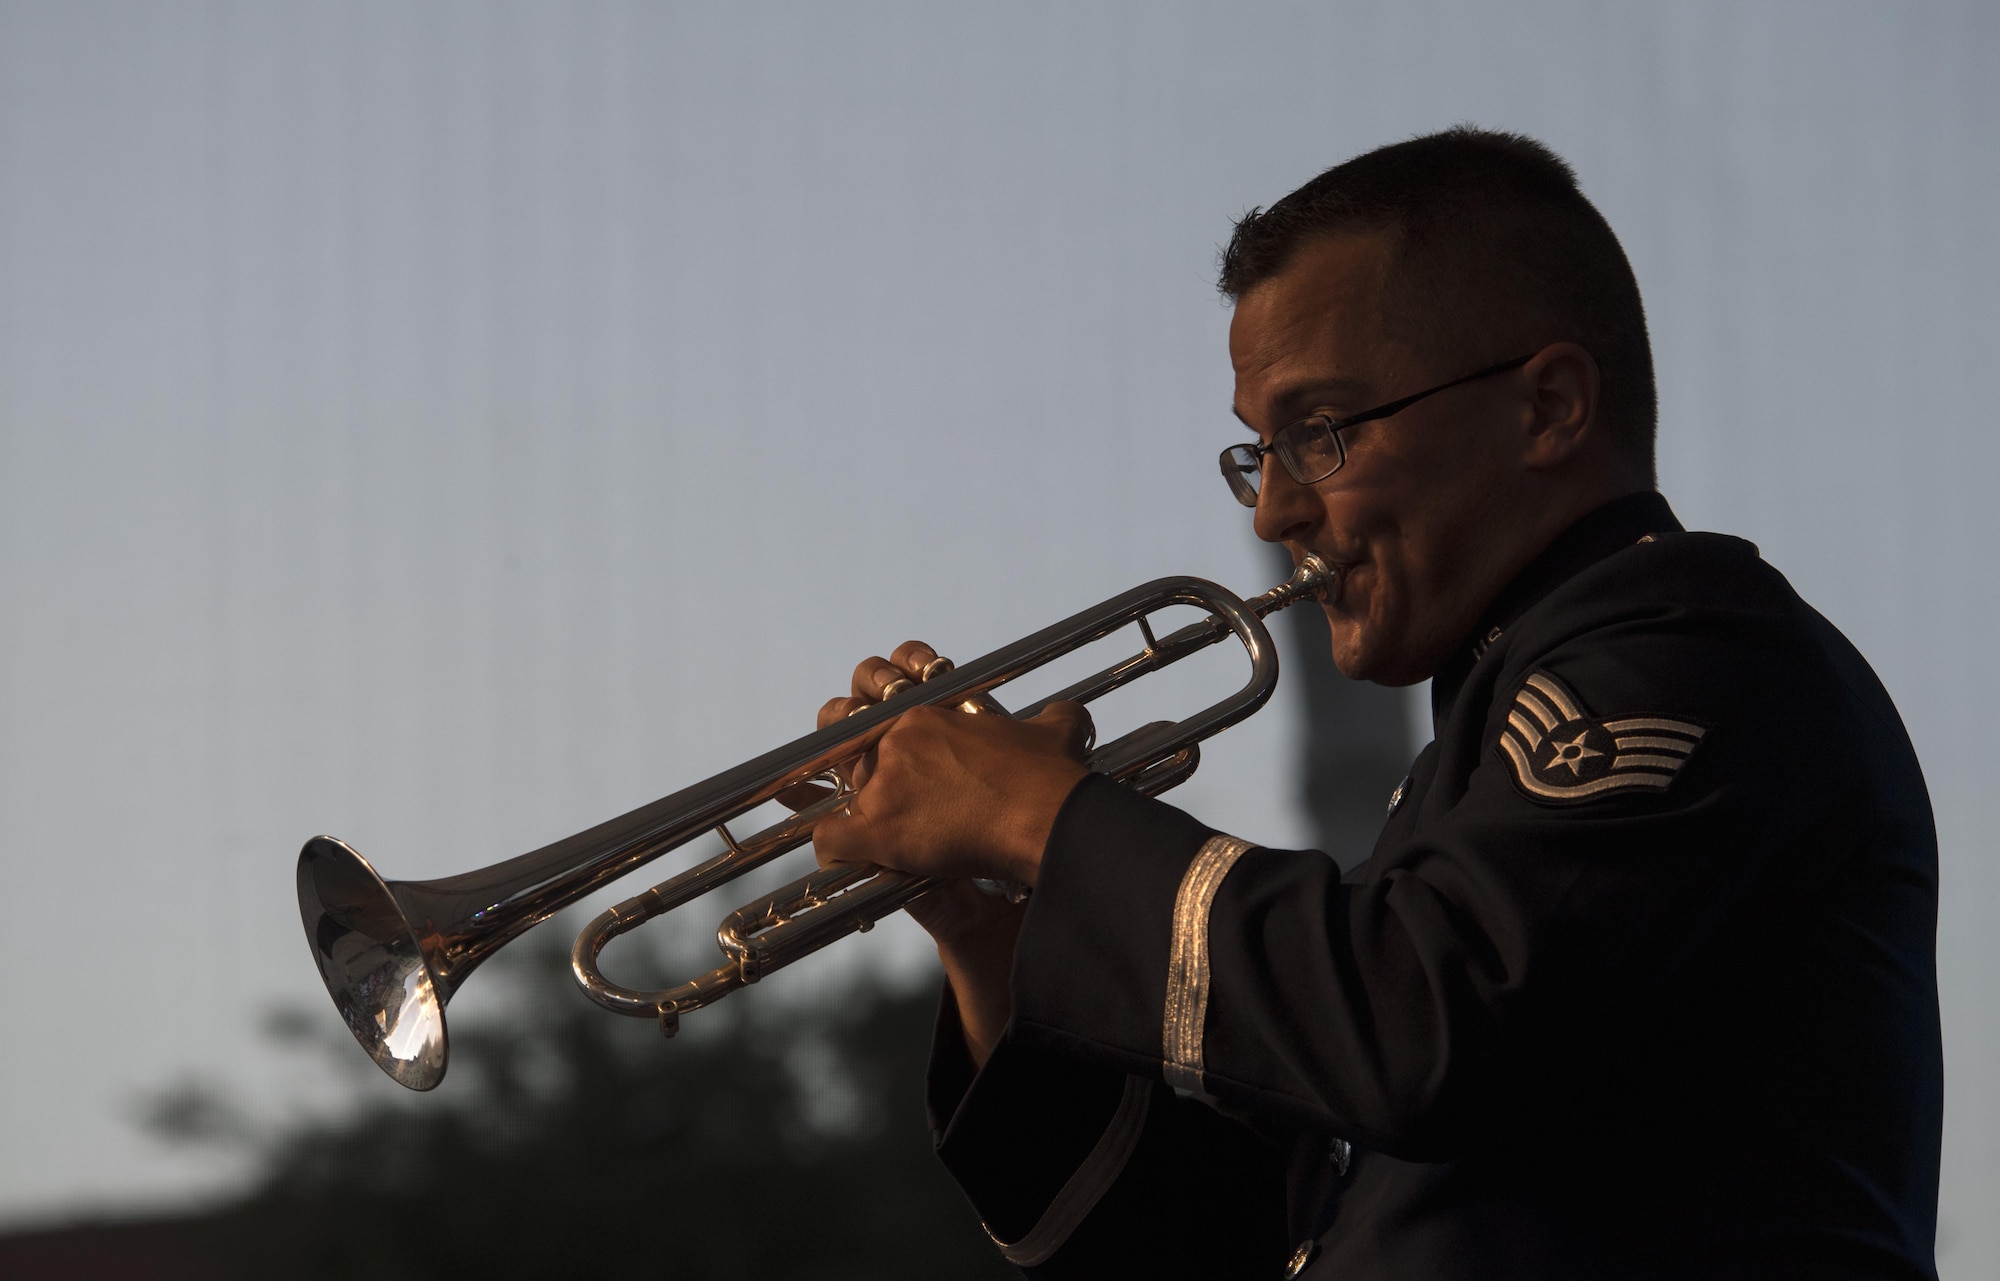 U.S. Air Force Staff Sgt. Nick Delvillano, U.S. Air Forces in Europe jazz band trumpet, plays a solo for the 73rd anniversary of the Slovak National Uprising in Bratislava, Slovakia, Aug. 30, 2017. The jazz band, known as the Ambassadors, was invited to perform two concerts in Slovakia for the celebration. The USAFE Band’s performance will help preserve the mutual commitment and trust between the U.S. and Slovakia. (U.S. Air Force photo by Senior Airman Tryphena Mayhugh)